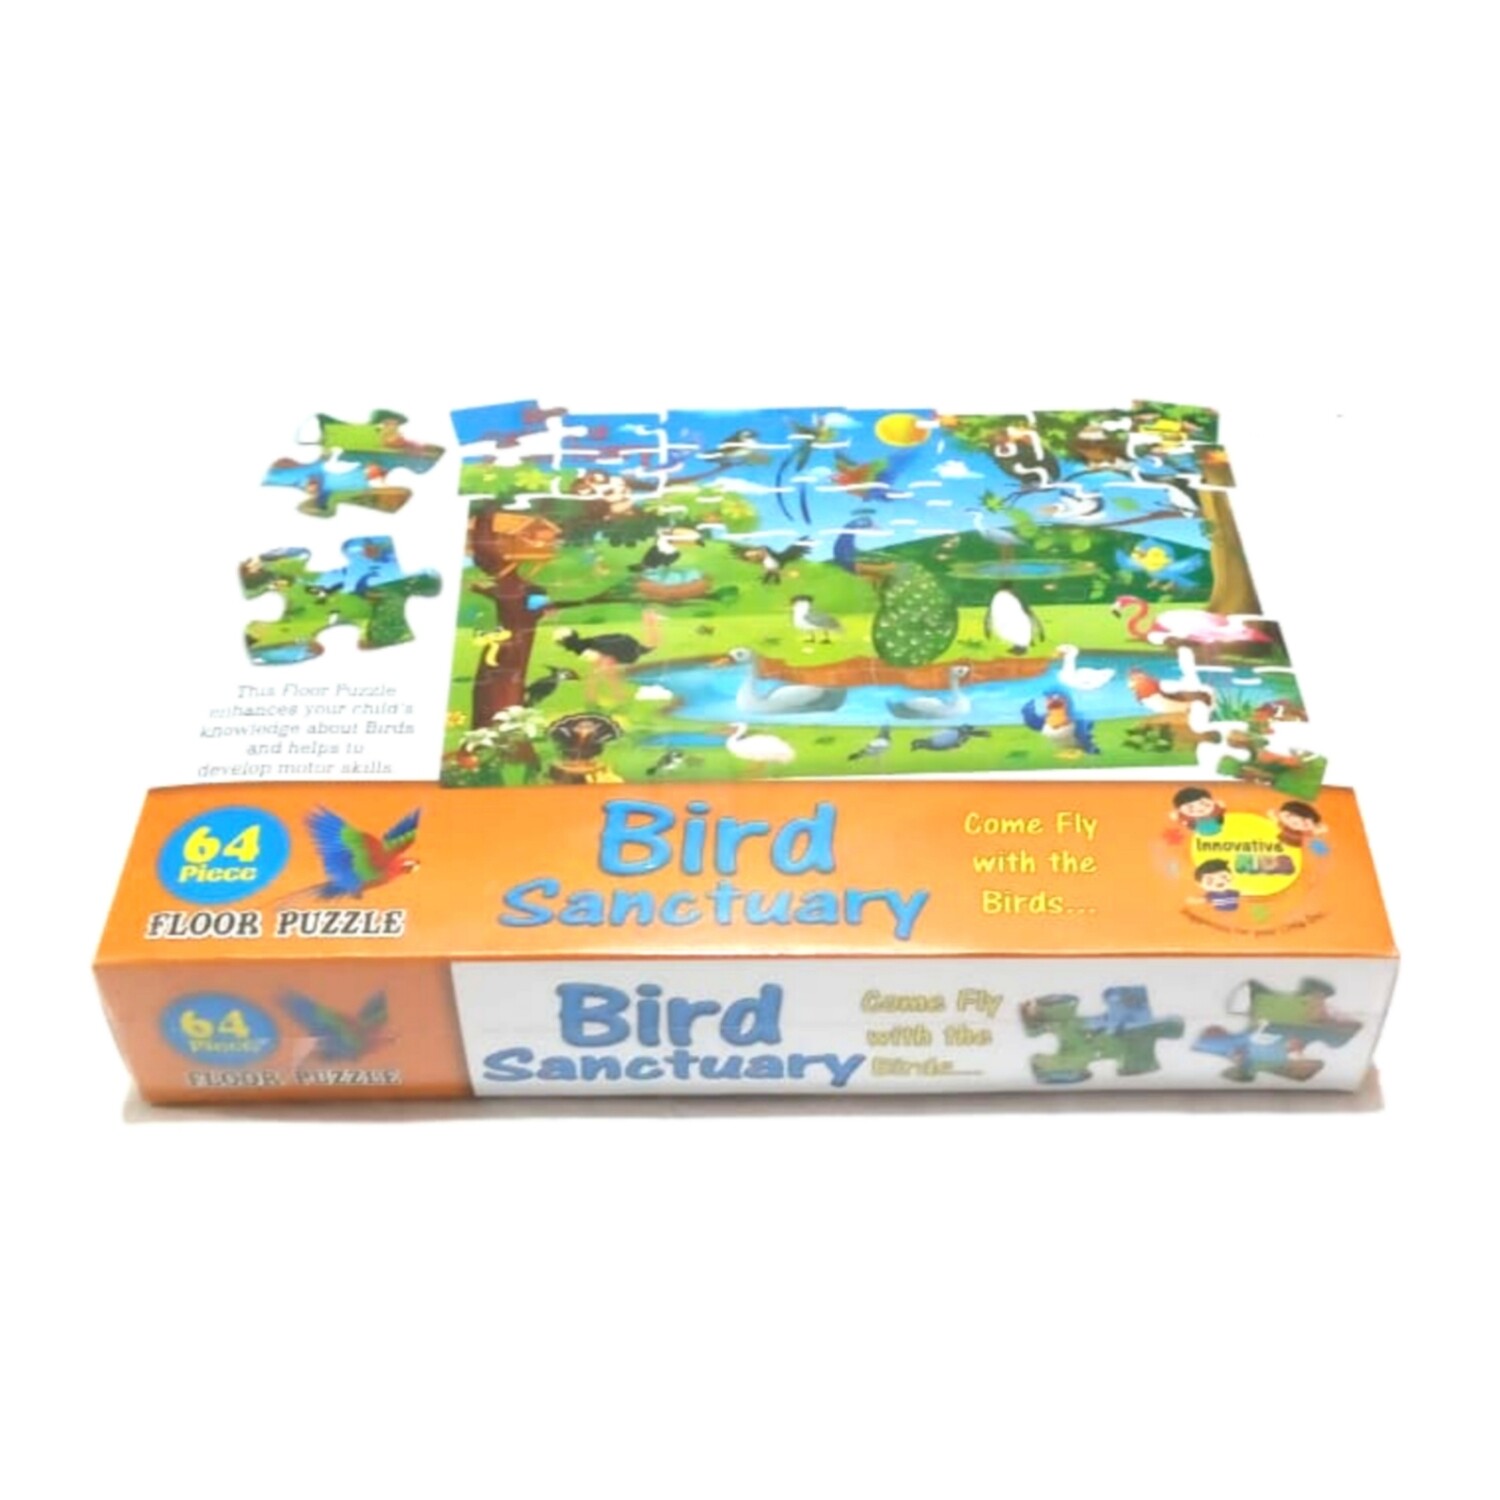 Innovative Kids Birds Sanctuary 64 Piece Floor Puzzle - Come Fly With The Birds